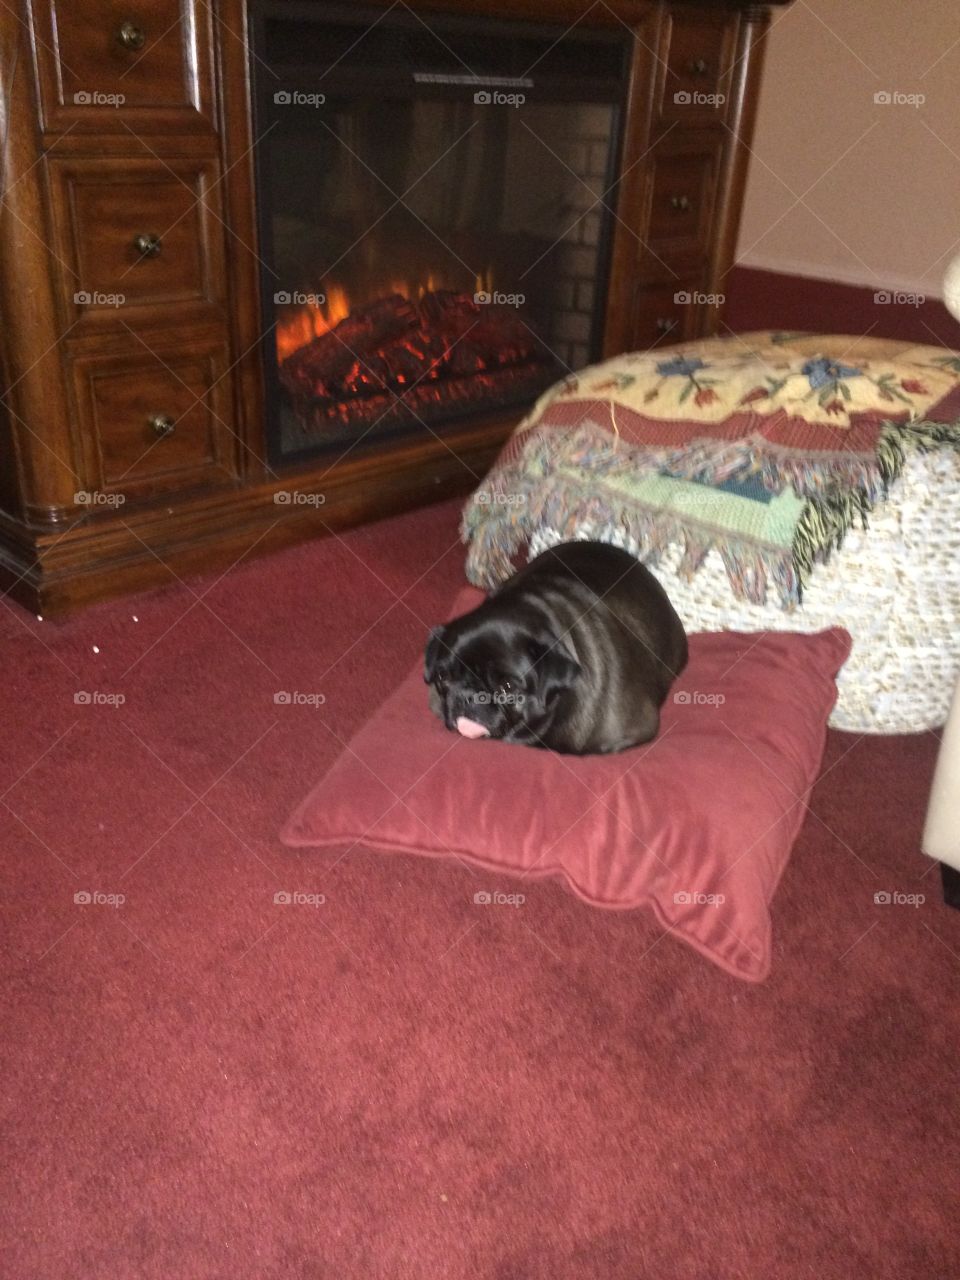 Here is my Family’s OWN dog,Wednesday sleeping with her tongue out. It is a PUG thing,of course.